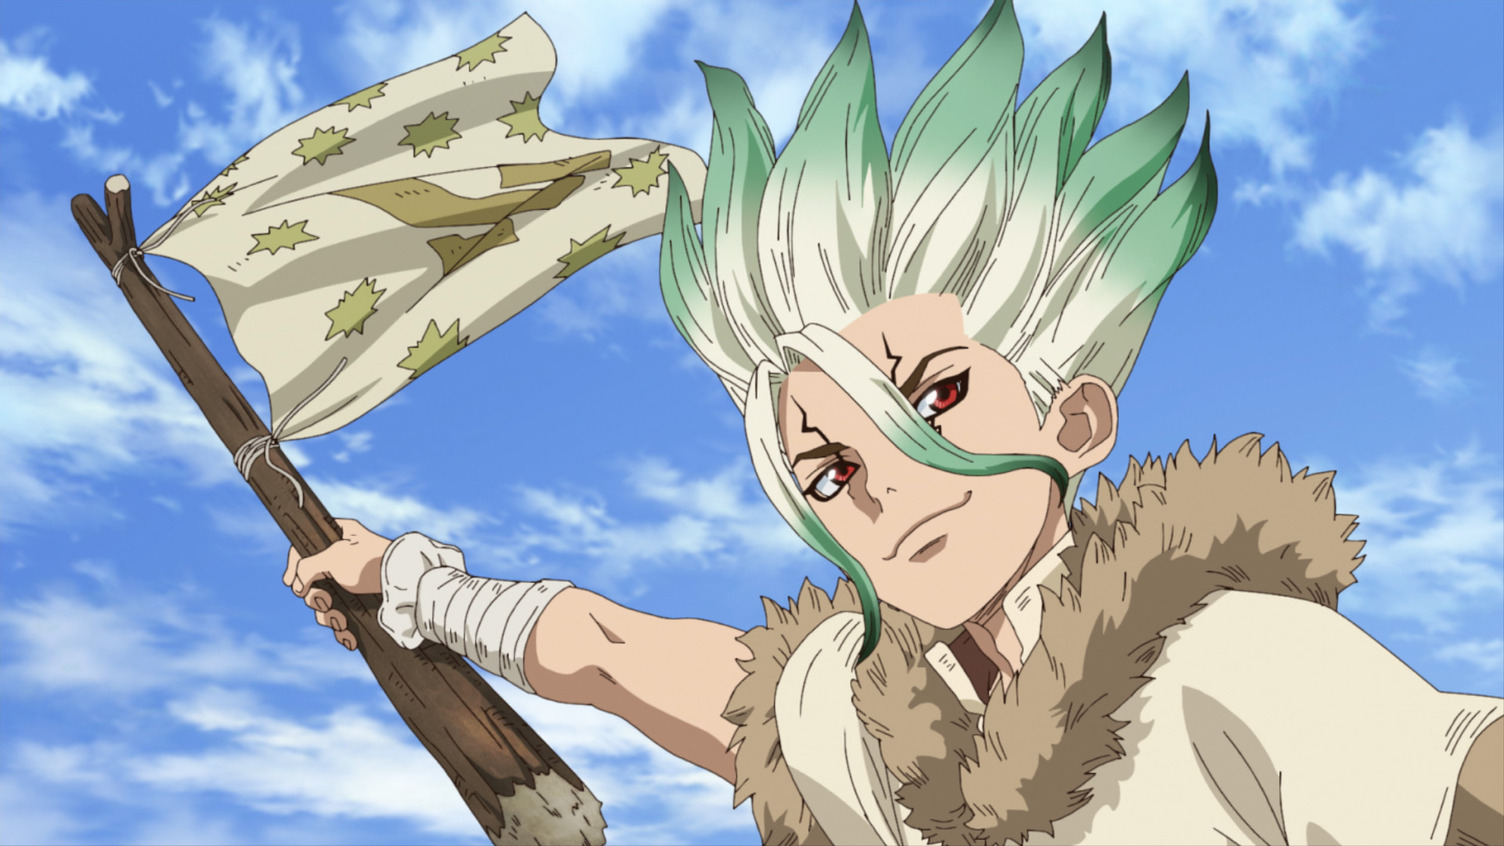 Dr. Stone Season 3 Release Window, Trailer Cast, and More | The